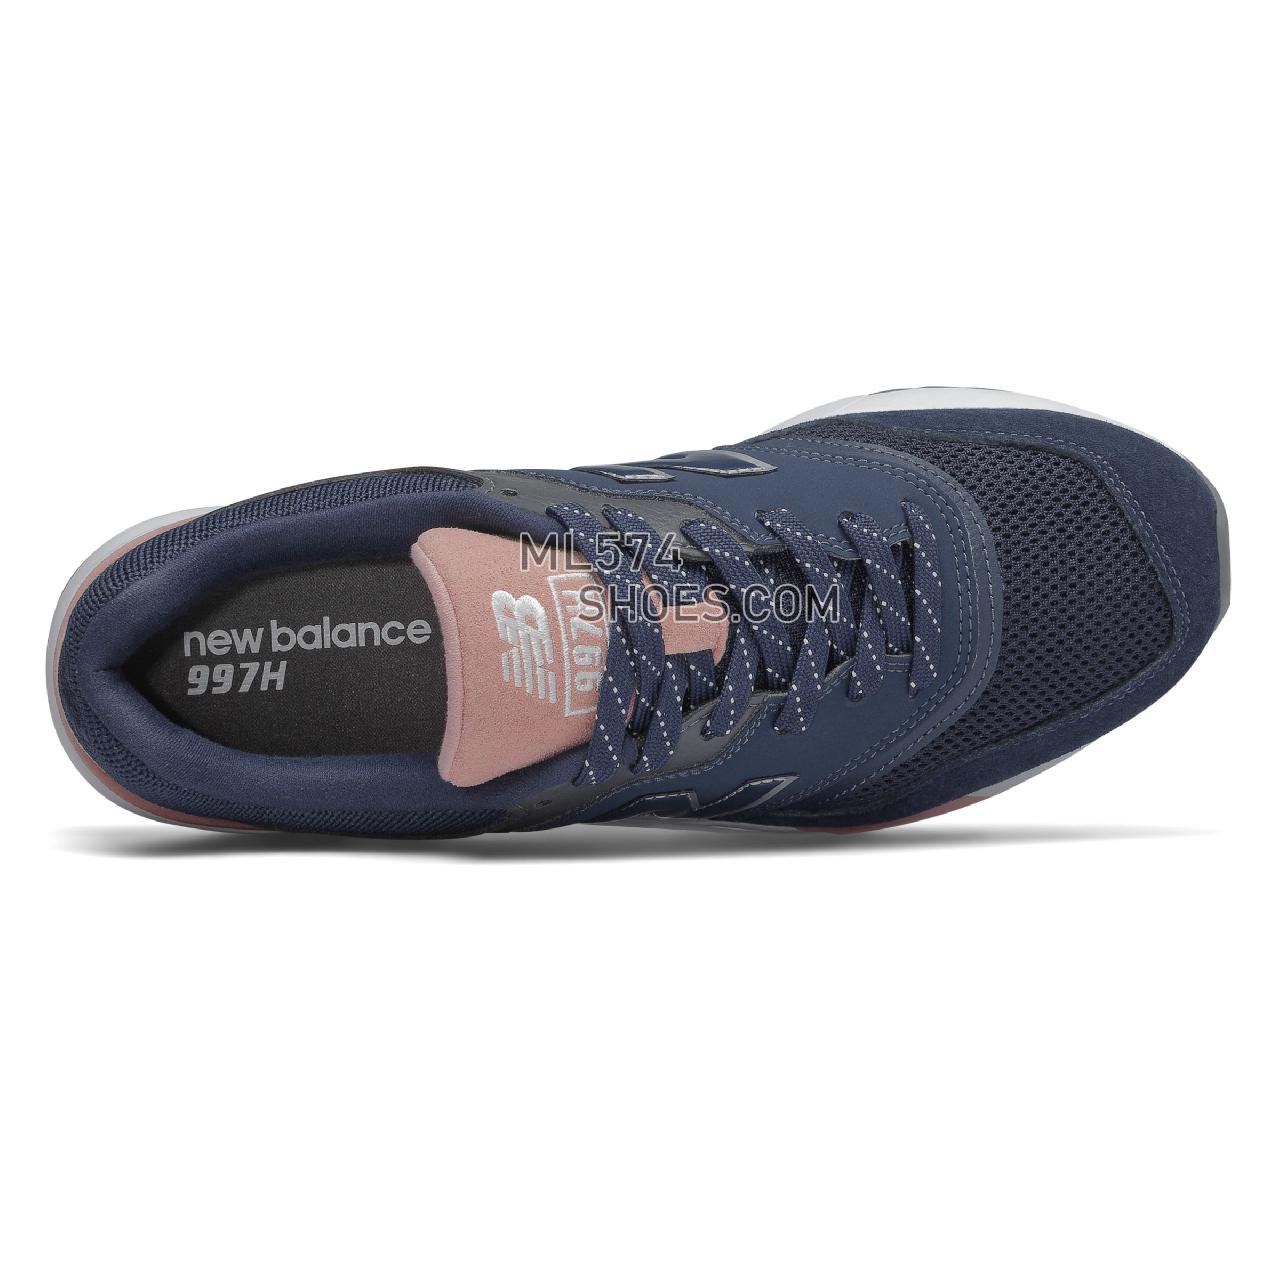 New Balance 997H - Women's Sport Style Sneakers - Natural Indigo with Saturn Pink - CW997HYA